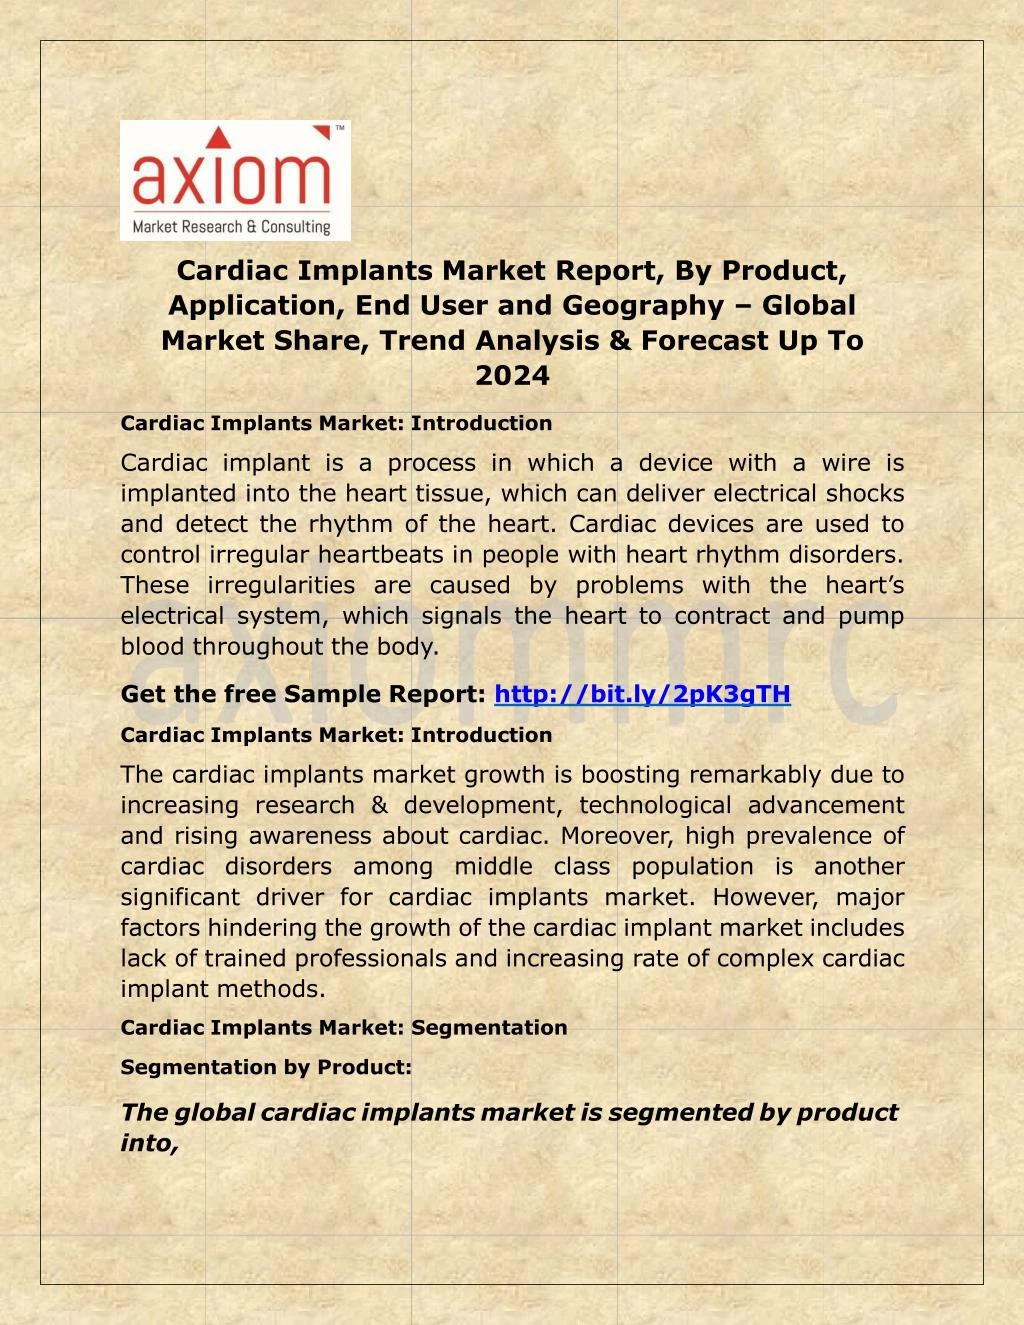 cardiac implants market report by product